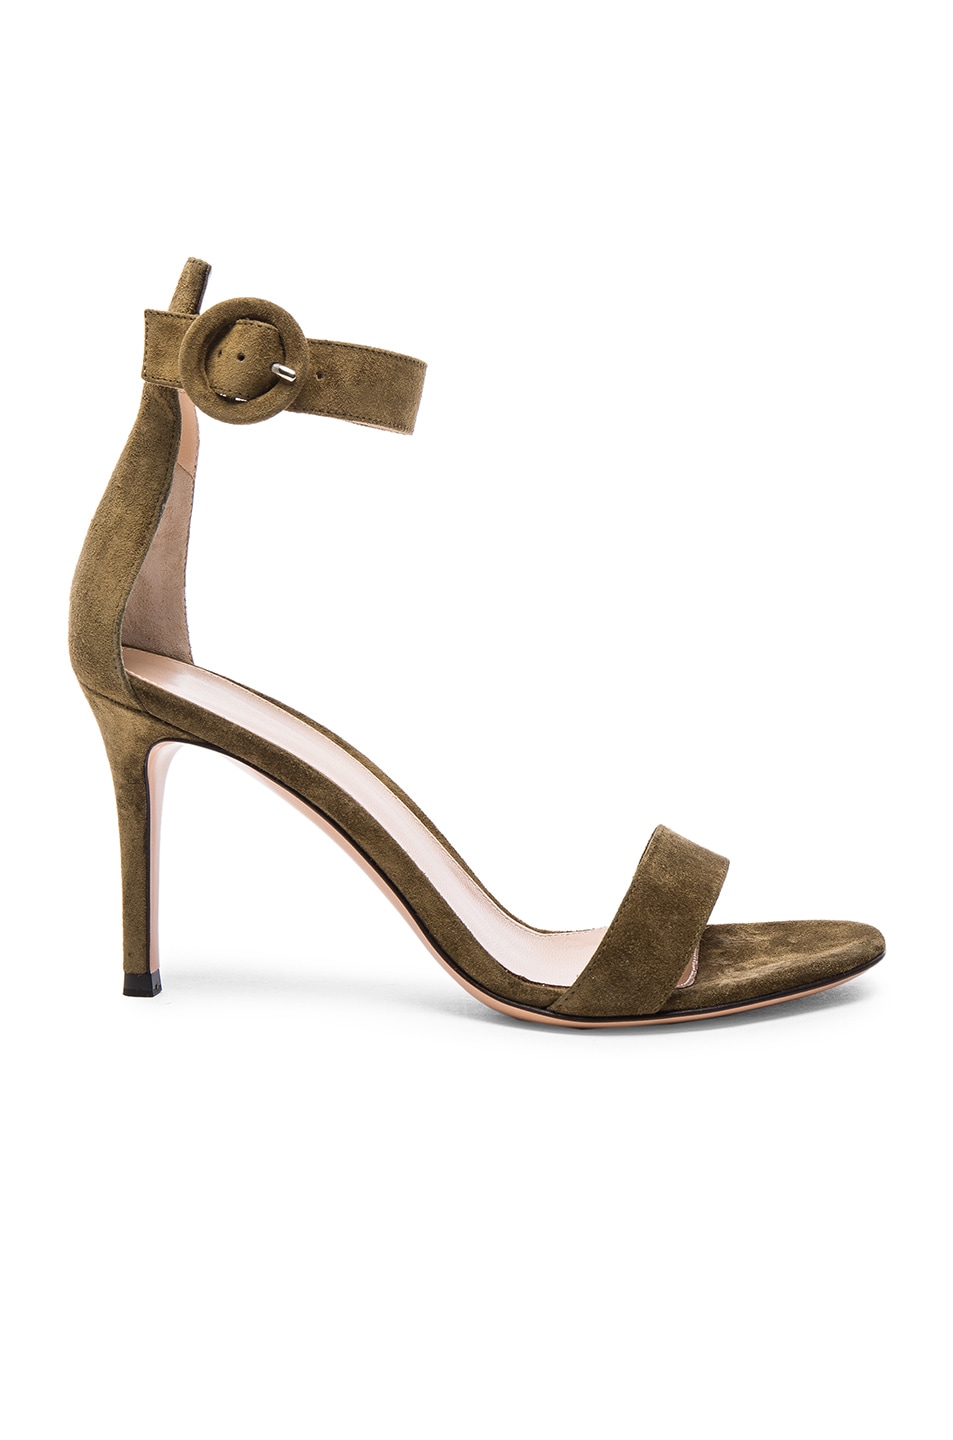 Image 1 of Gianvito Rossi Suede Ankle Strap Heels in Marais